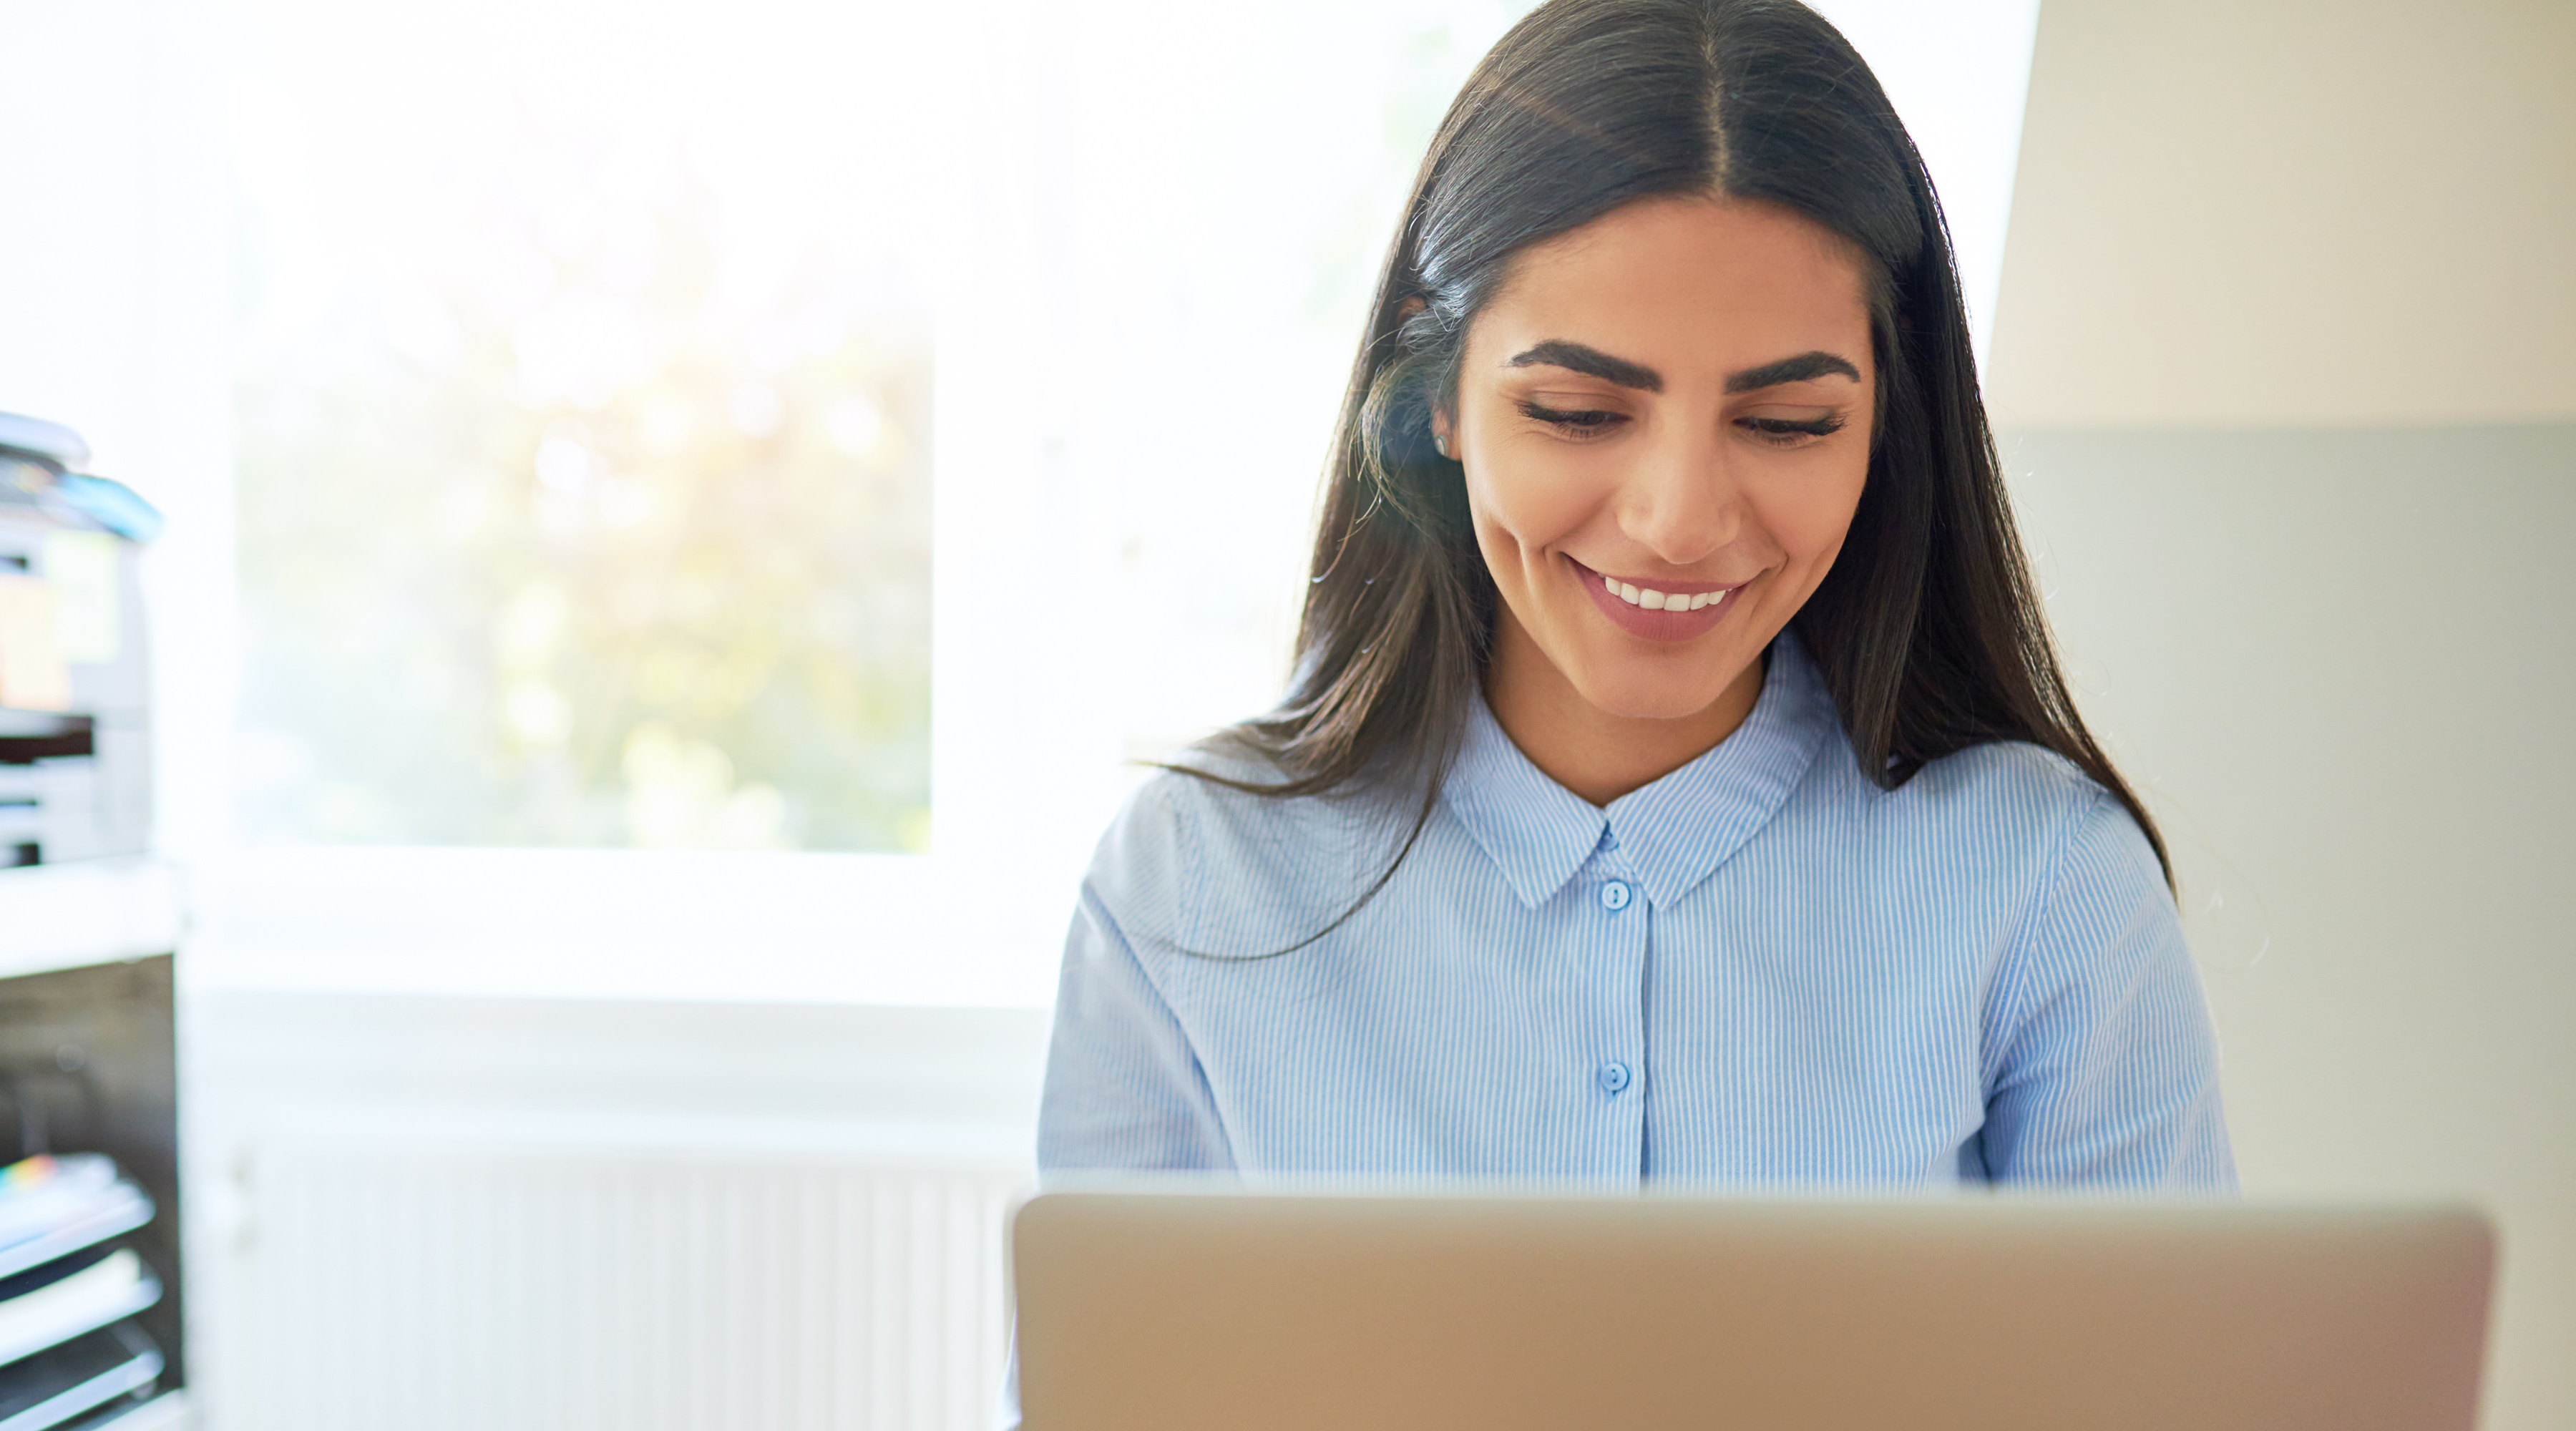 Photo of happy woman on computer - positive employee experience